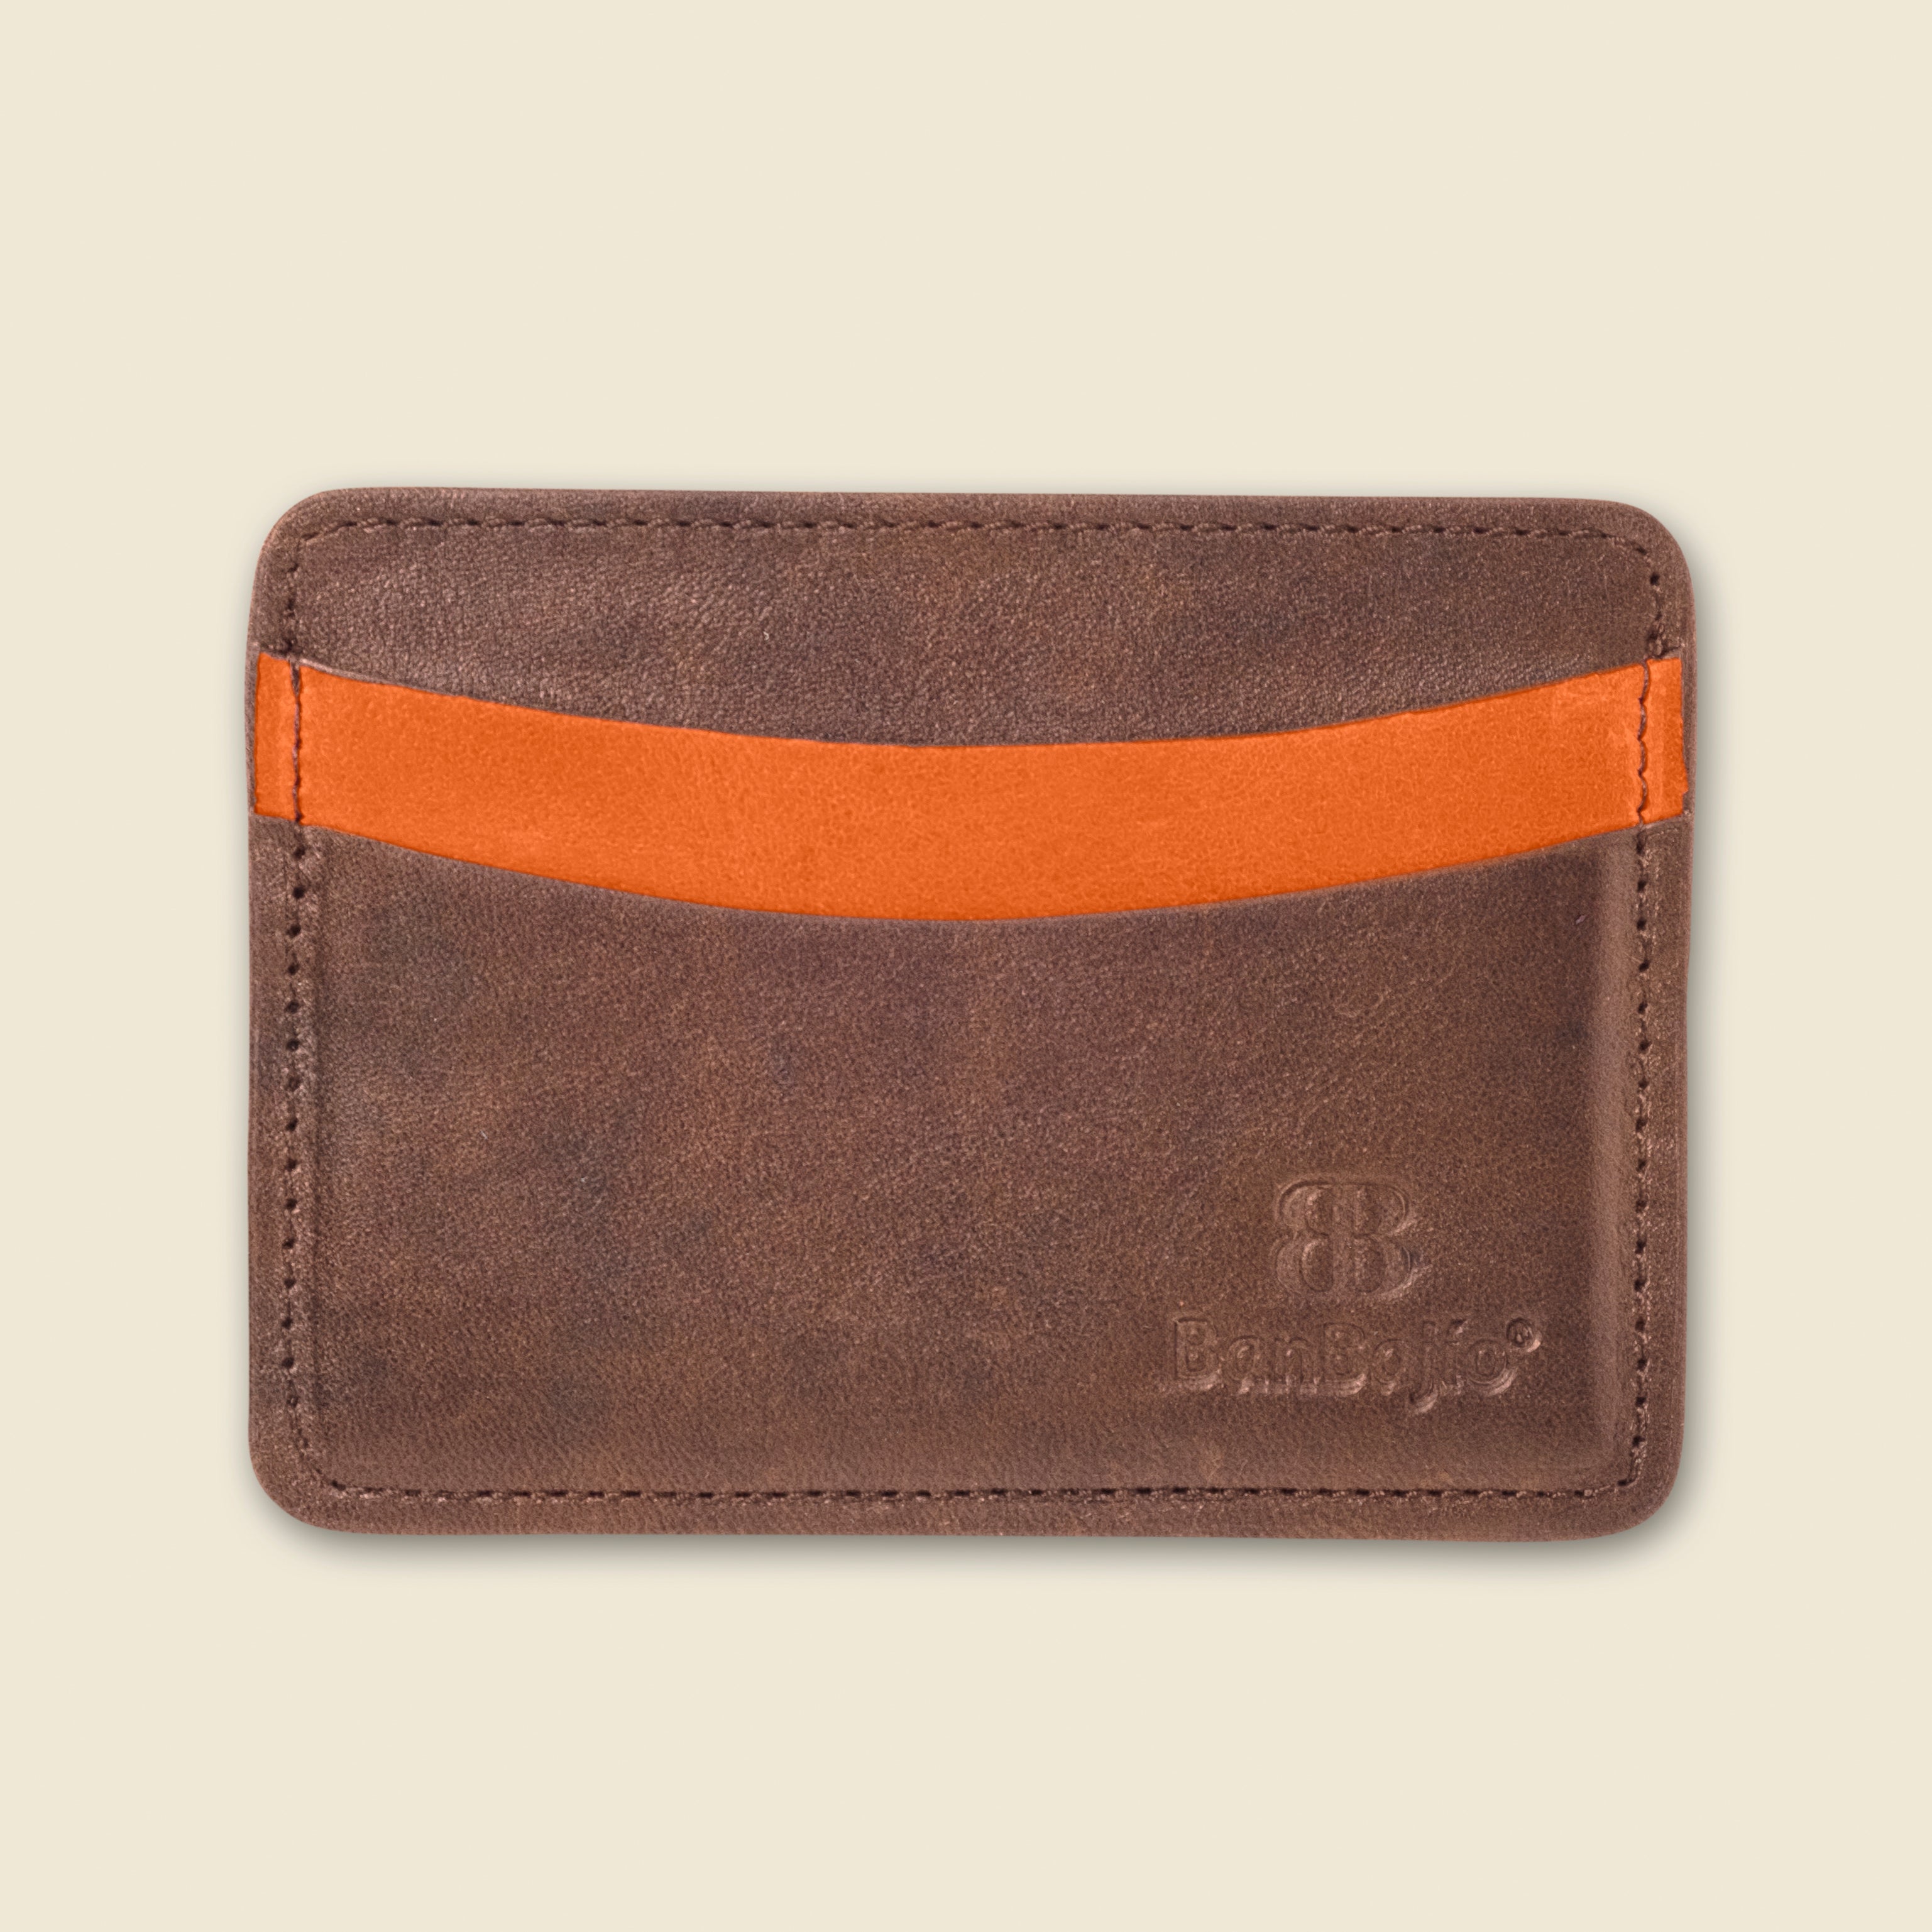 Private label wallet for starting out brands